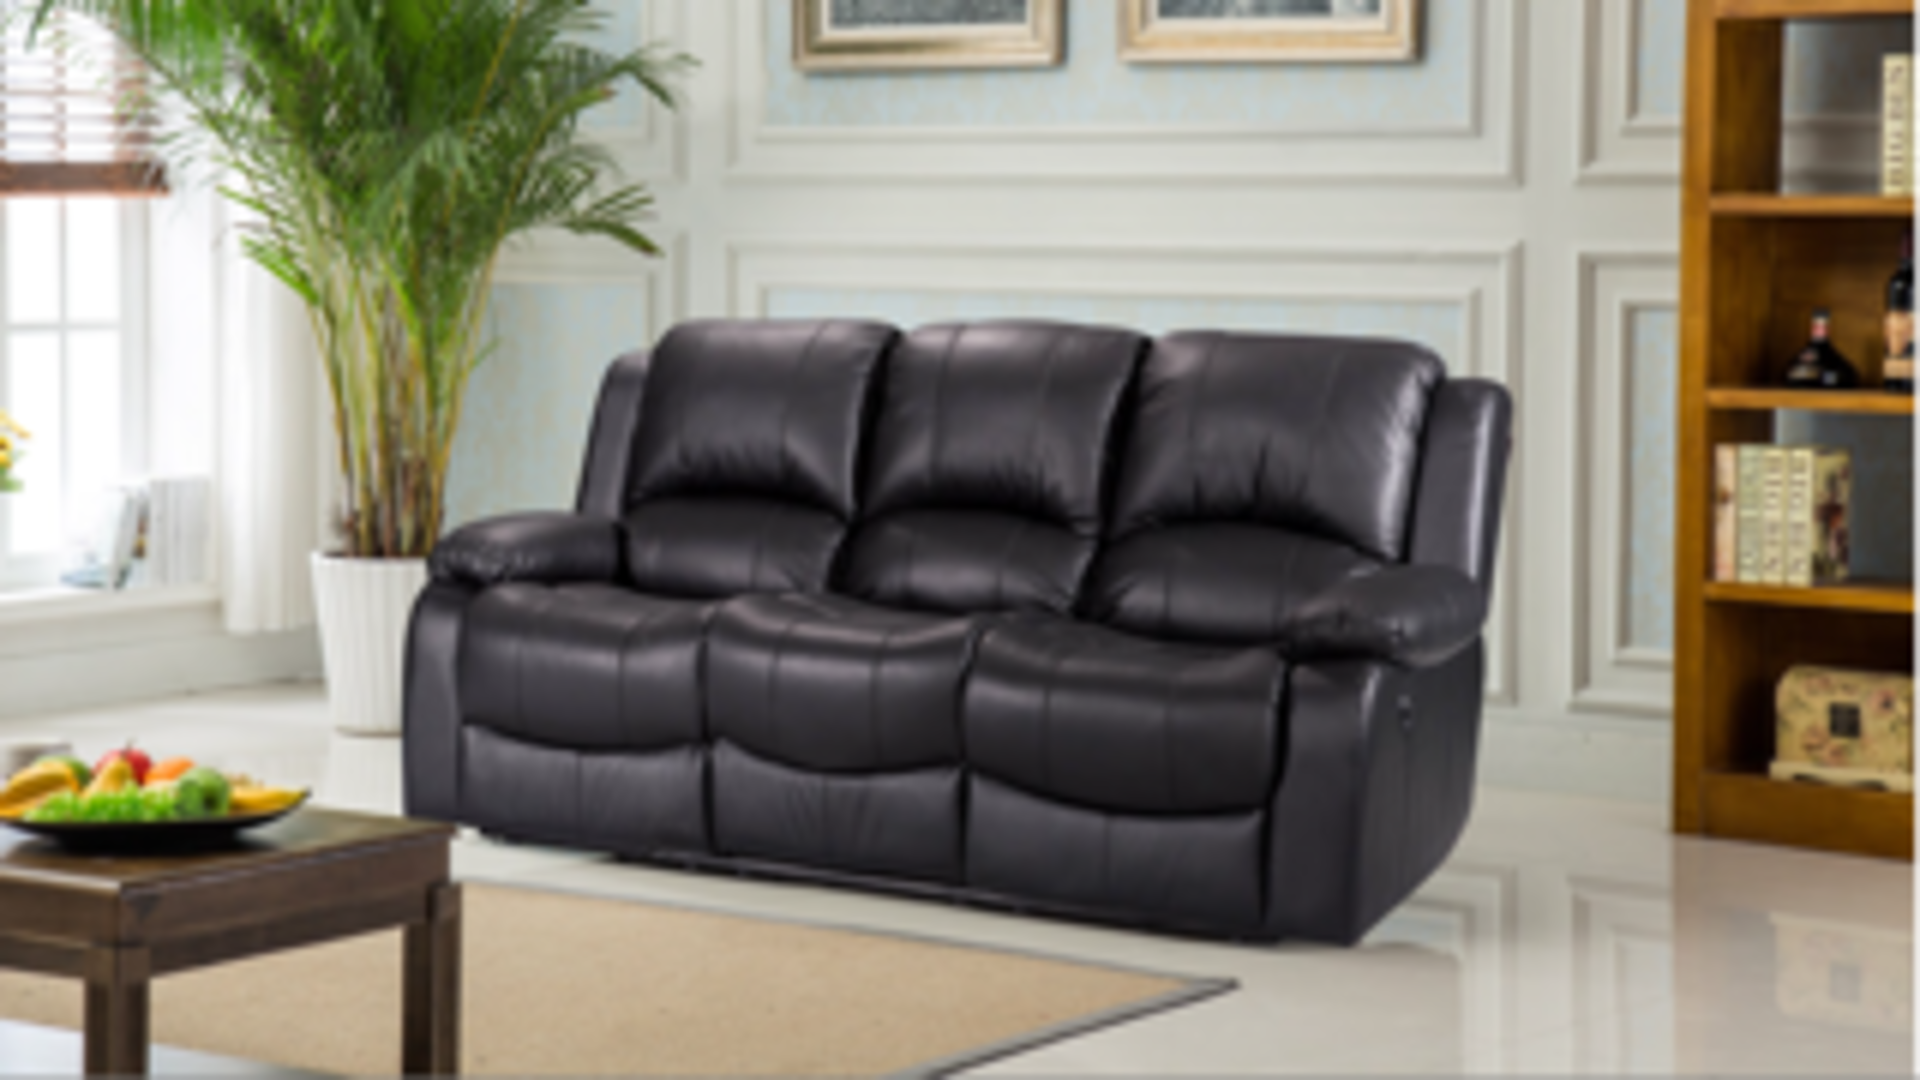 Brand new boxed Vancouver 3 seater plus 2 seater black leather reclining sofas - Bild 3 aus 3